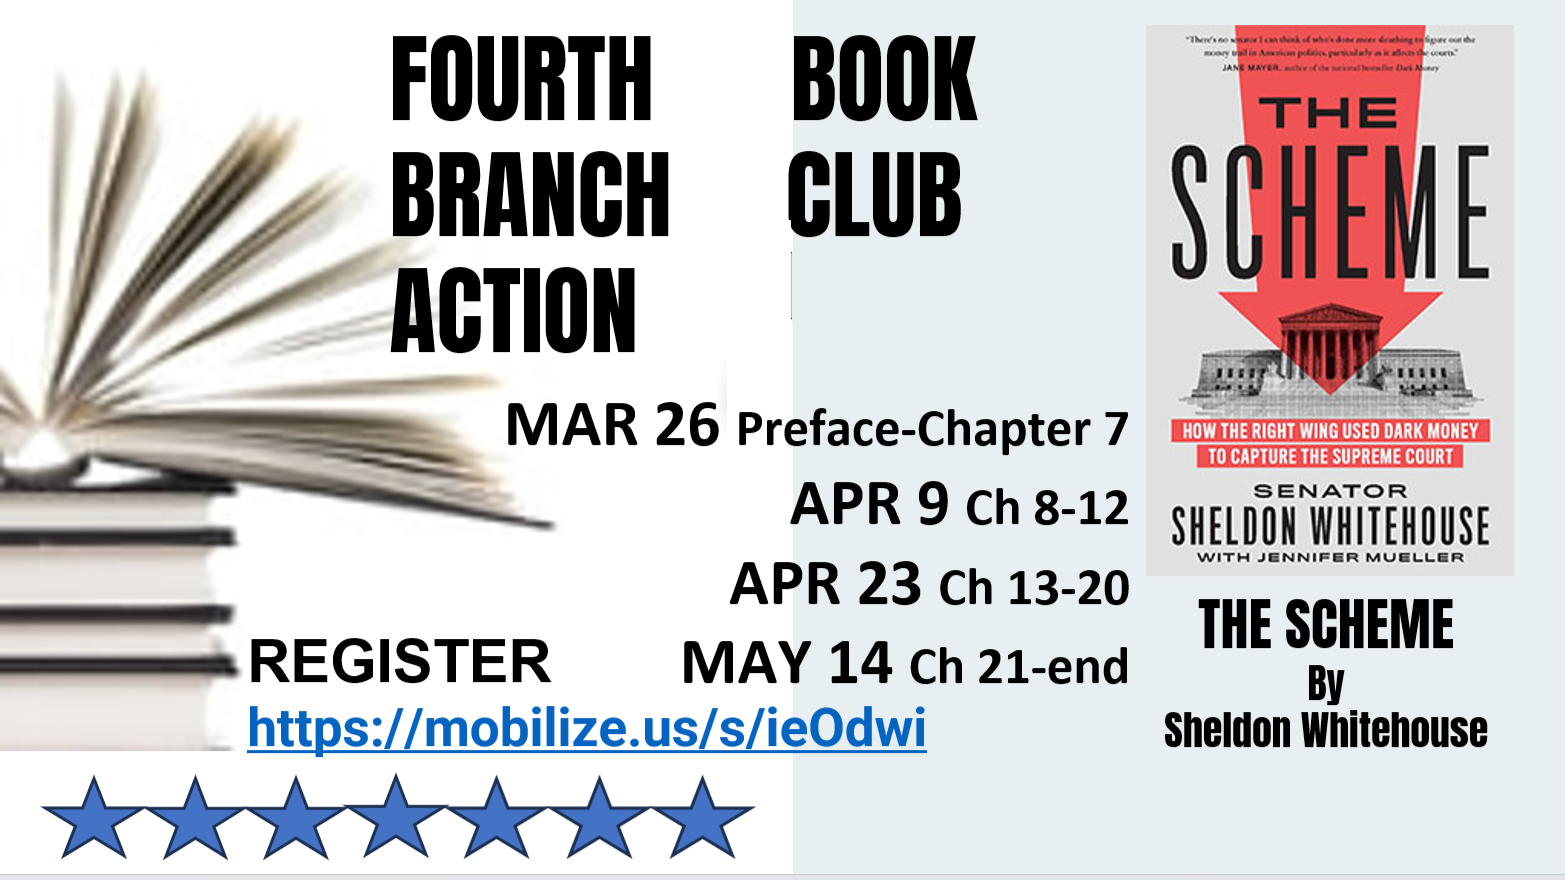 Fourth Branch Action Book Club